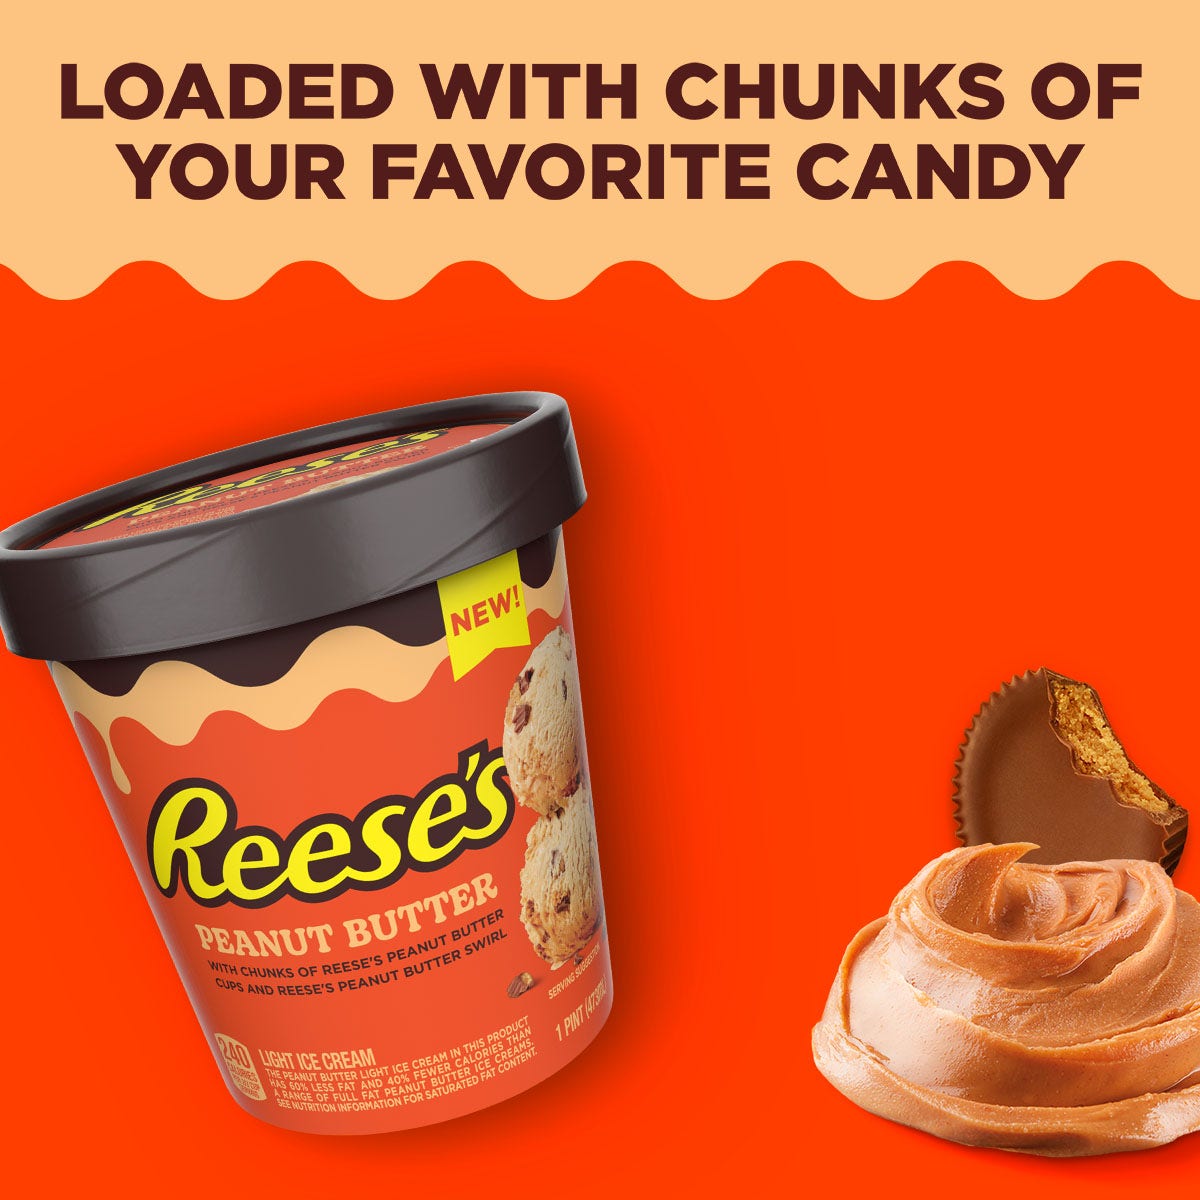 Reeses Peanut Butter Light Ice Cream With Reeses Peanut Butter Cups And Peanut Butter Swirl